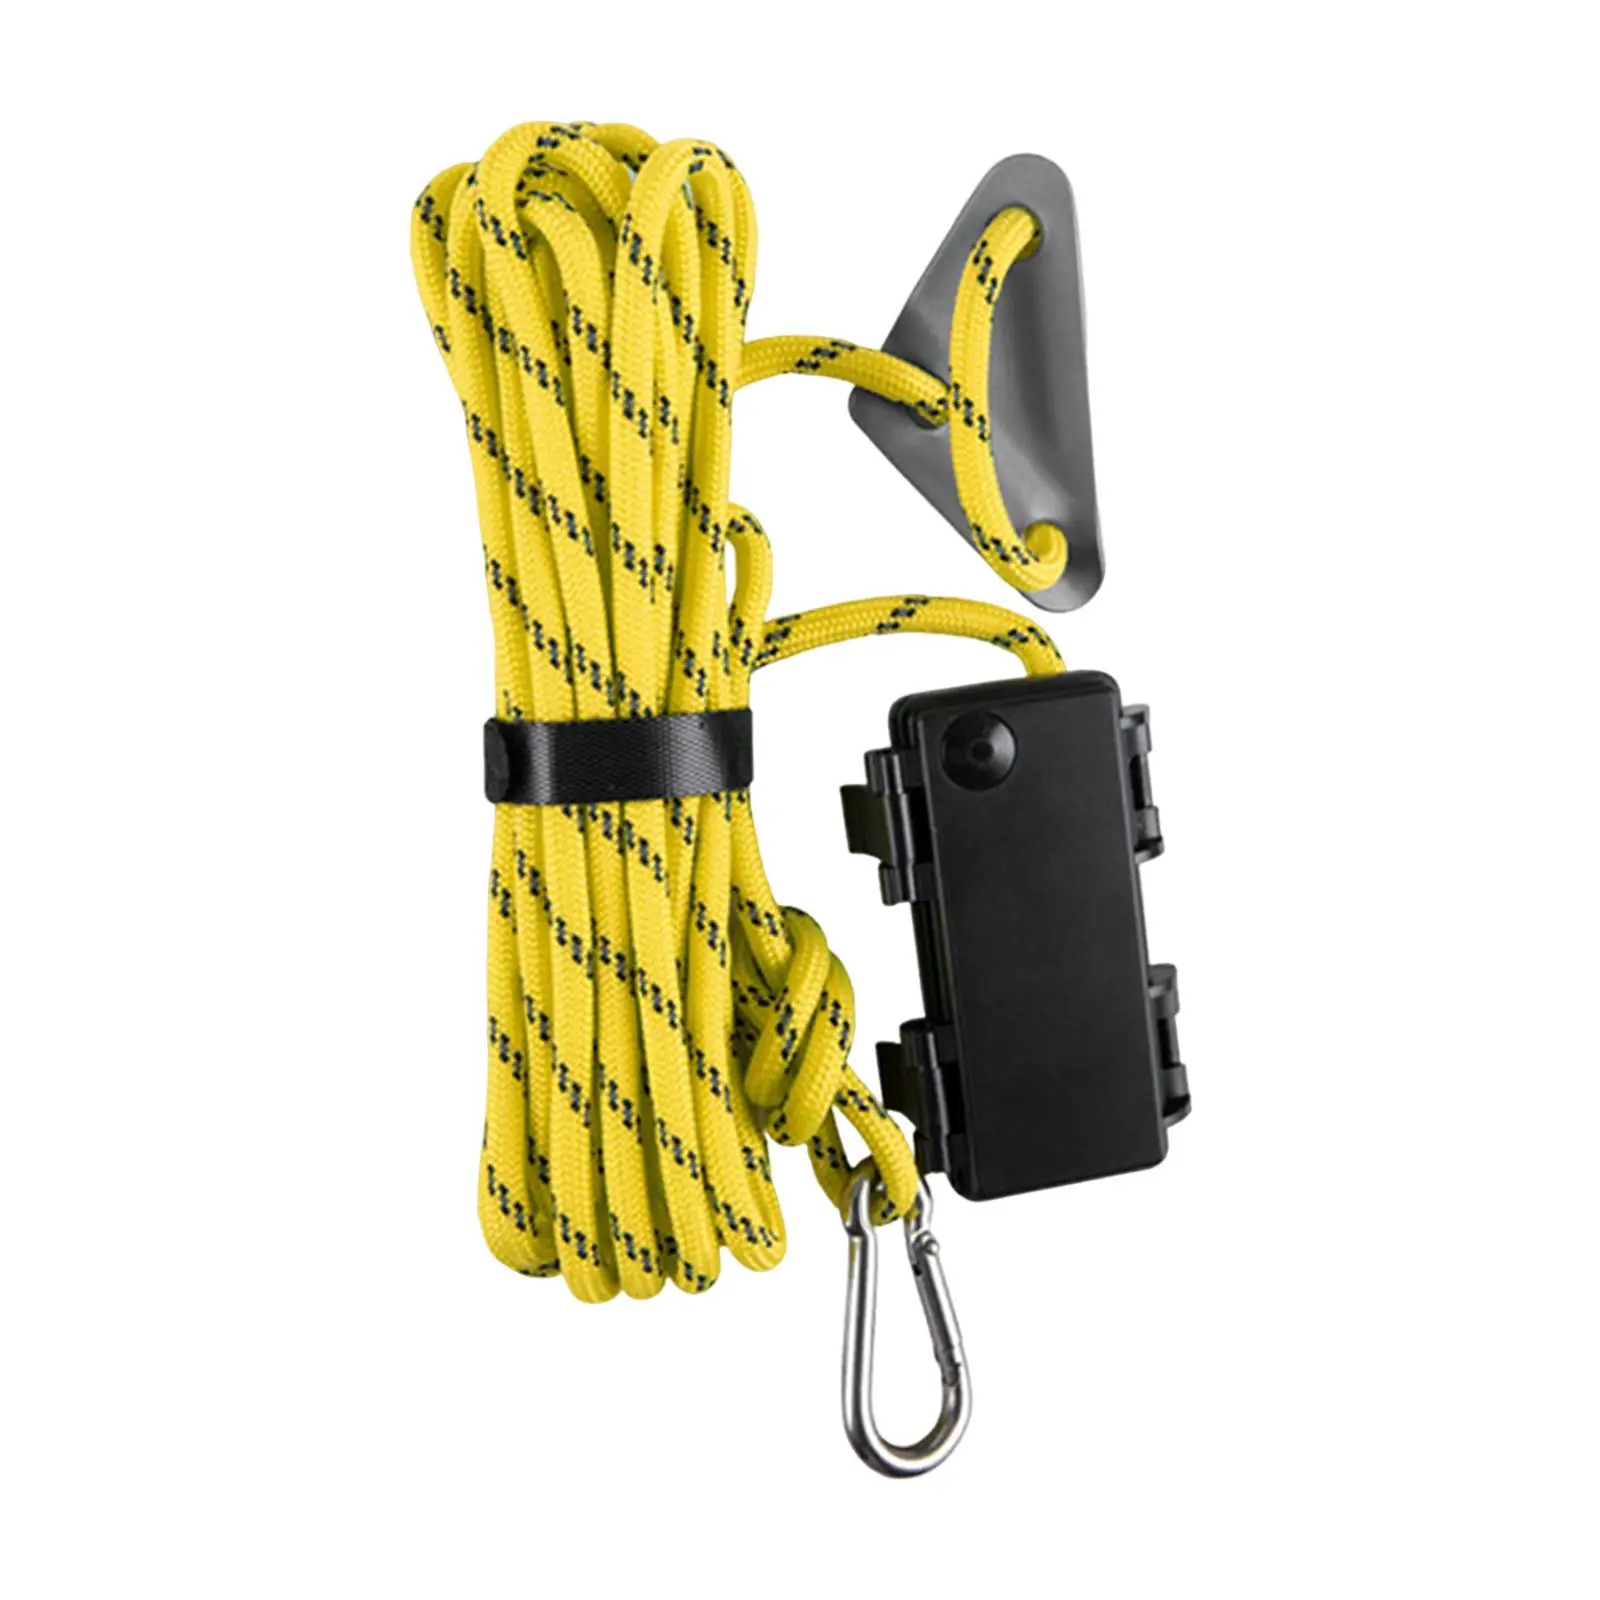 Guy Lines Lamp Tent Accessory LED Tent Rope for Backpacking Travel Climbing